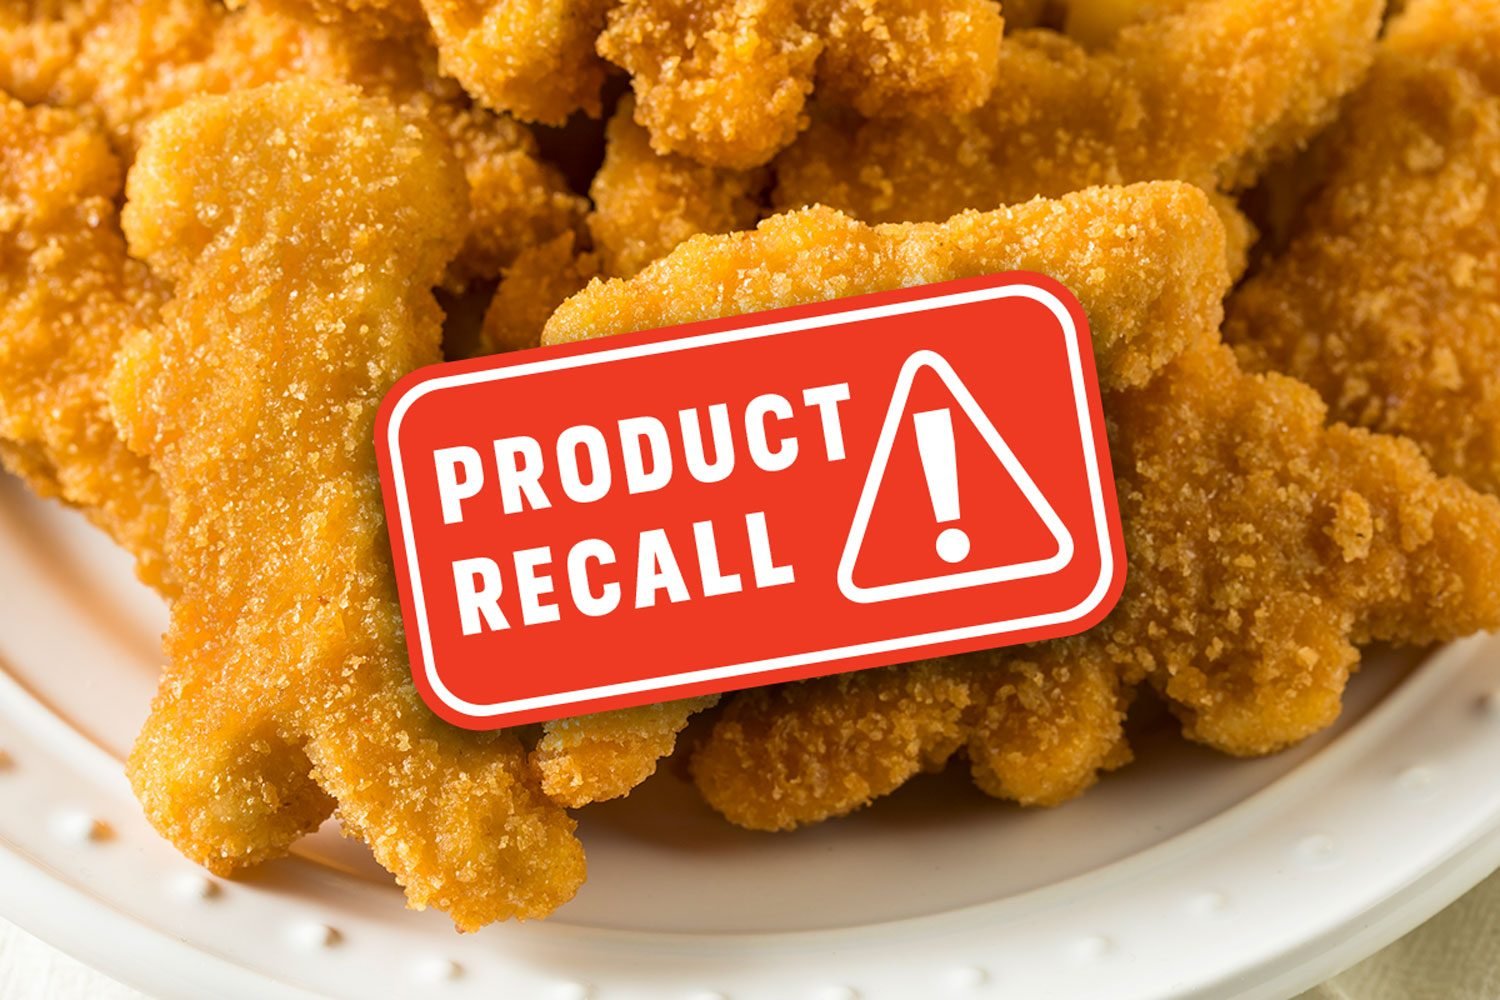 Tyson Simply Recalled 1000’s of Packages of Its Dino-Formed Rooster Nuggets